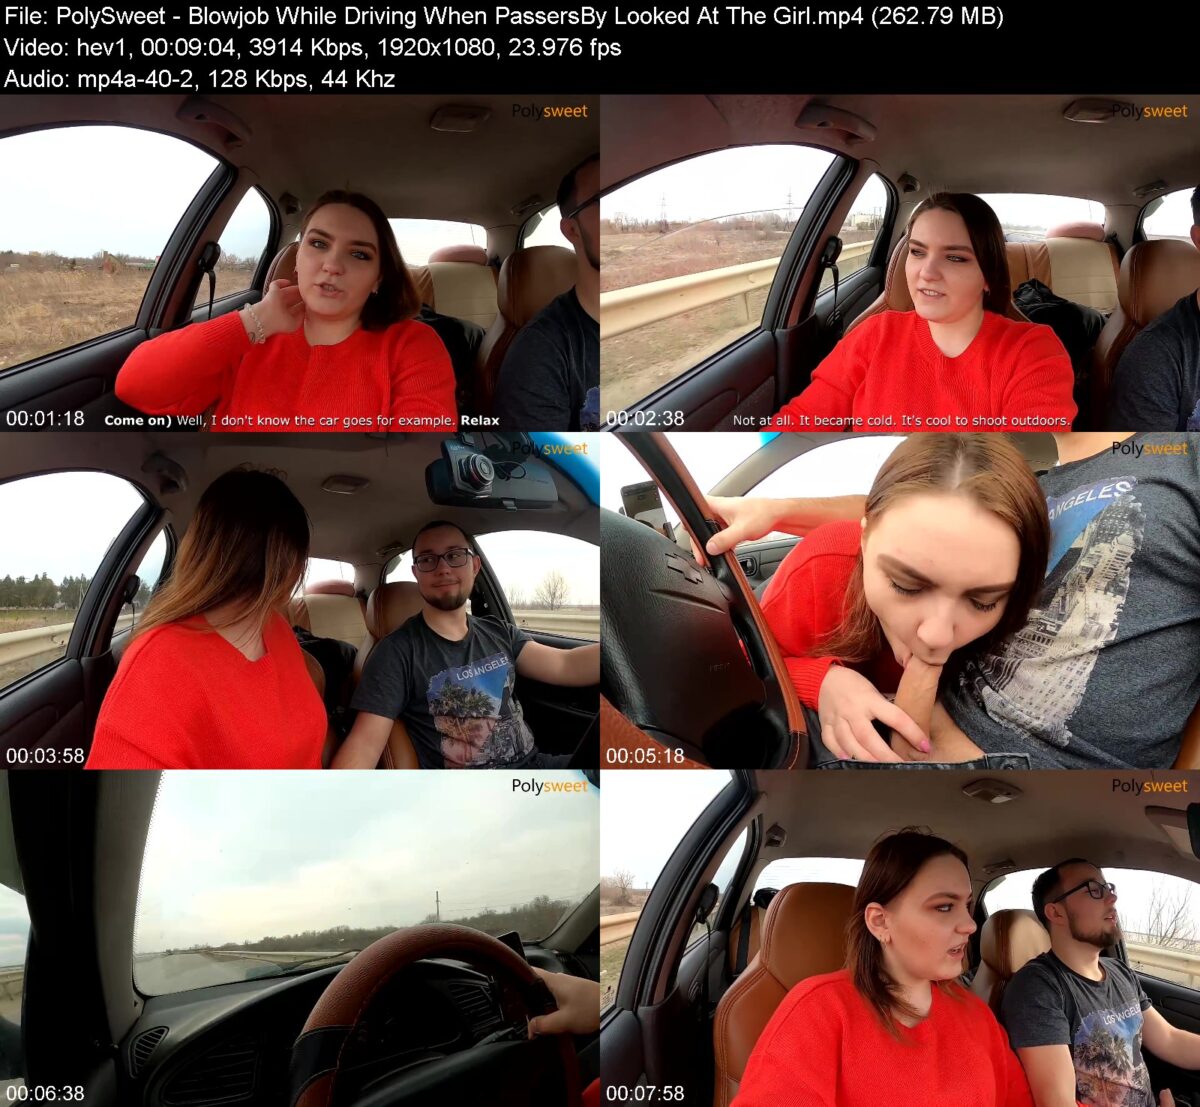 PolySweet in Blowjob While Driving When PassersBy Looked At The Girl